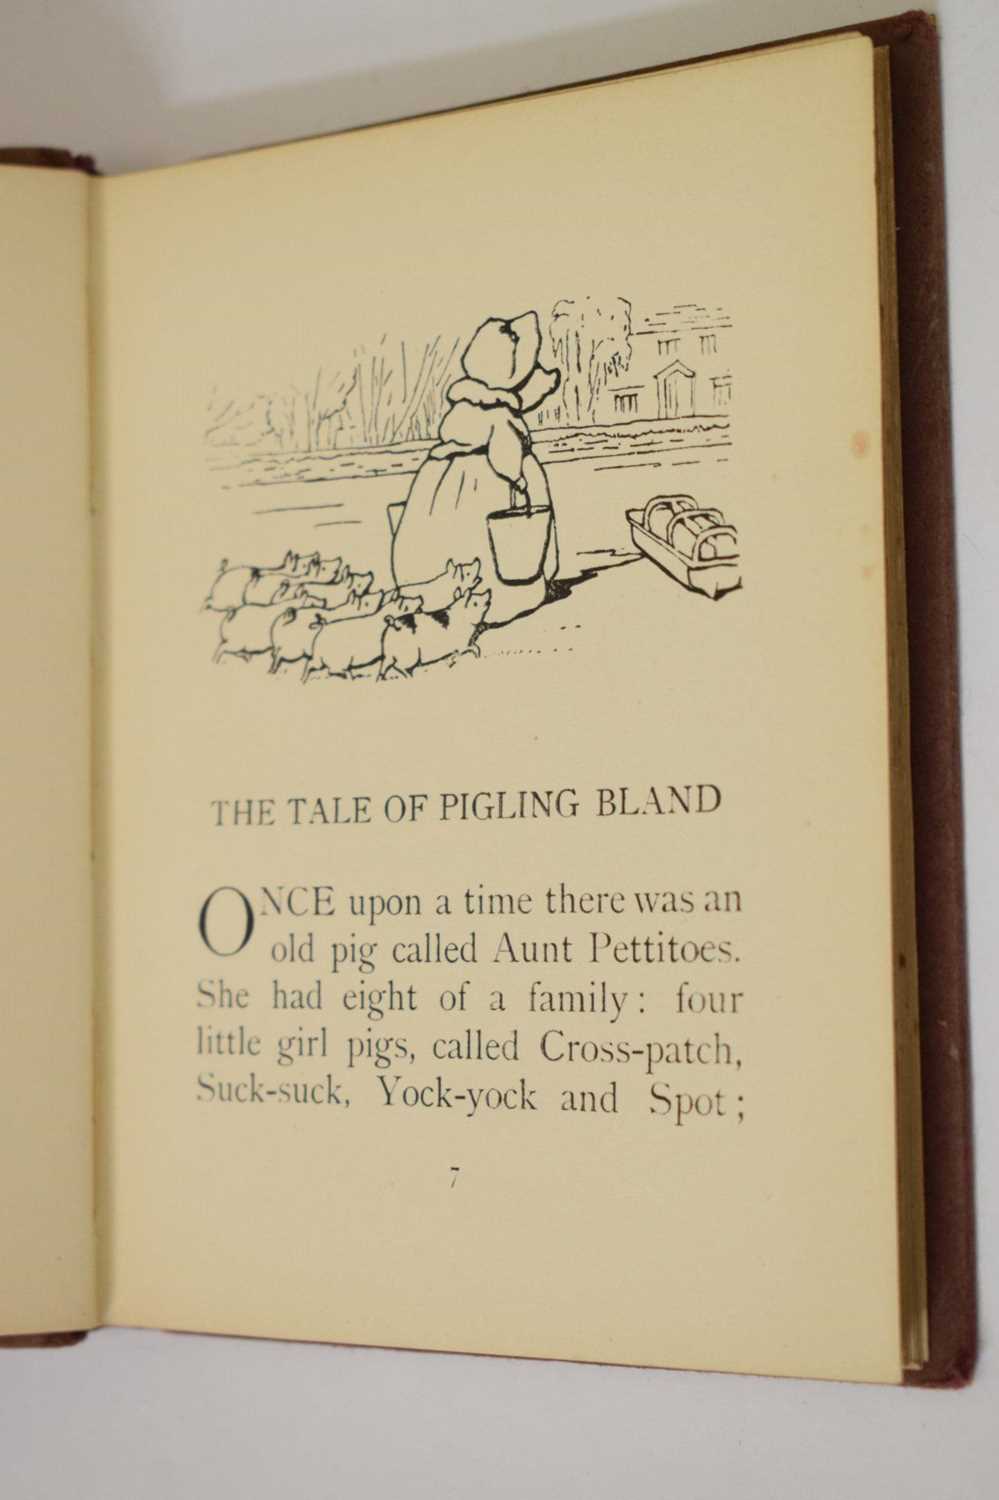 Potter, Beatrix - 'The Tale of Pigling Bland' - First edition 1913 - Image 19 of 19